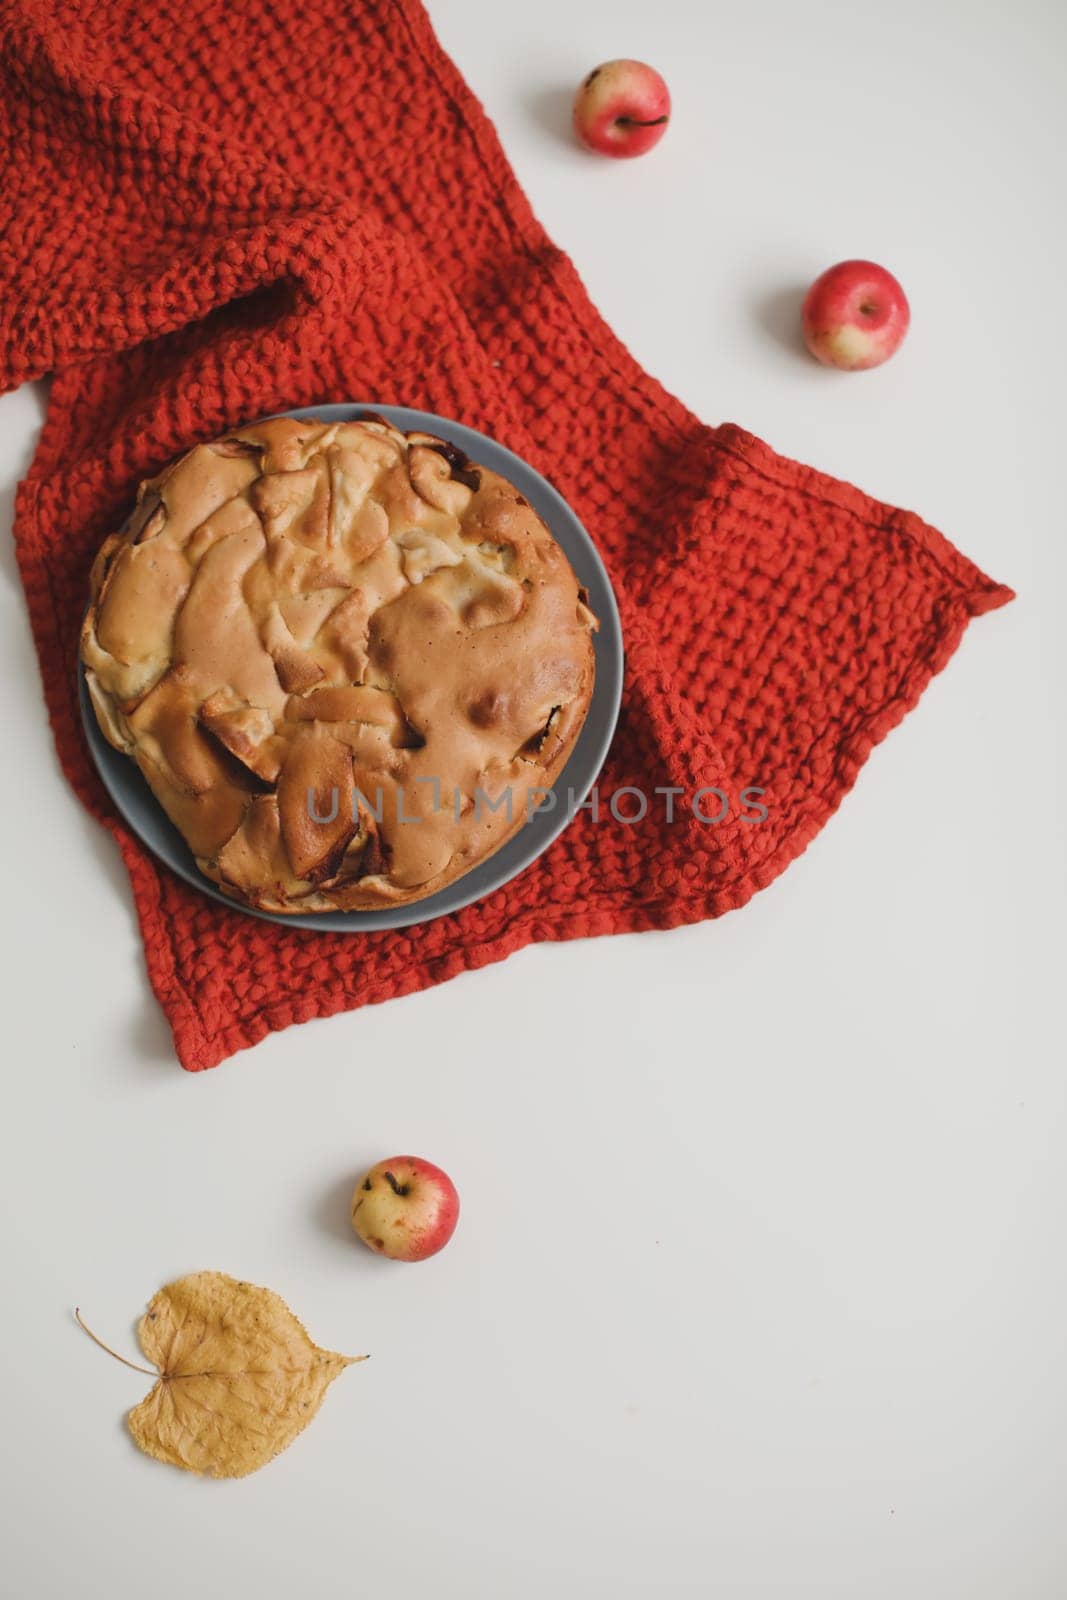 Slice of apple pie on a plate with apples on white table background